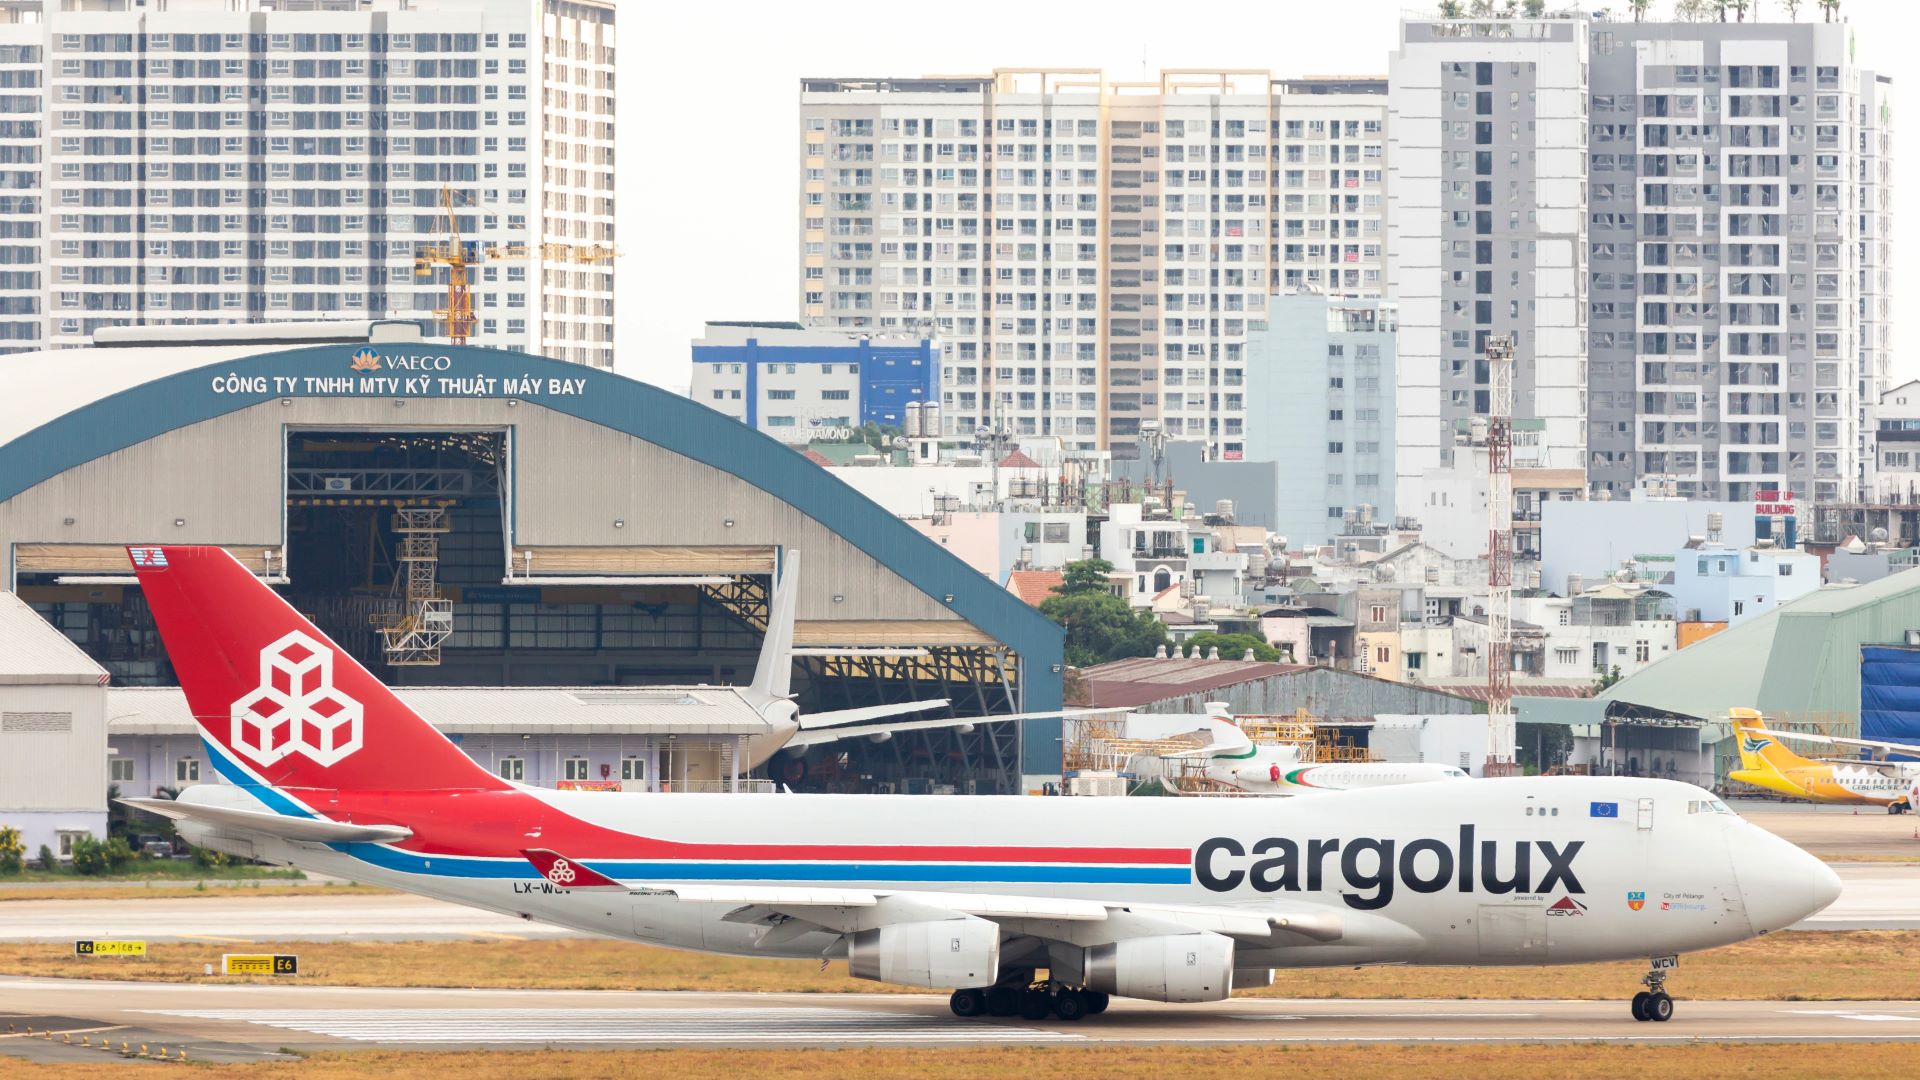 A Cargolux jumbo jet taxing at airport with Ho Chi Minh City apartments in background.